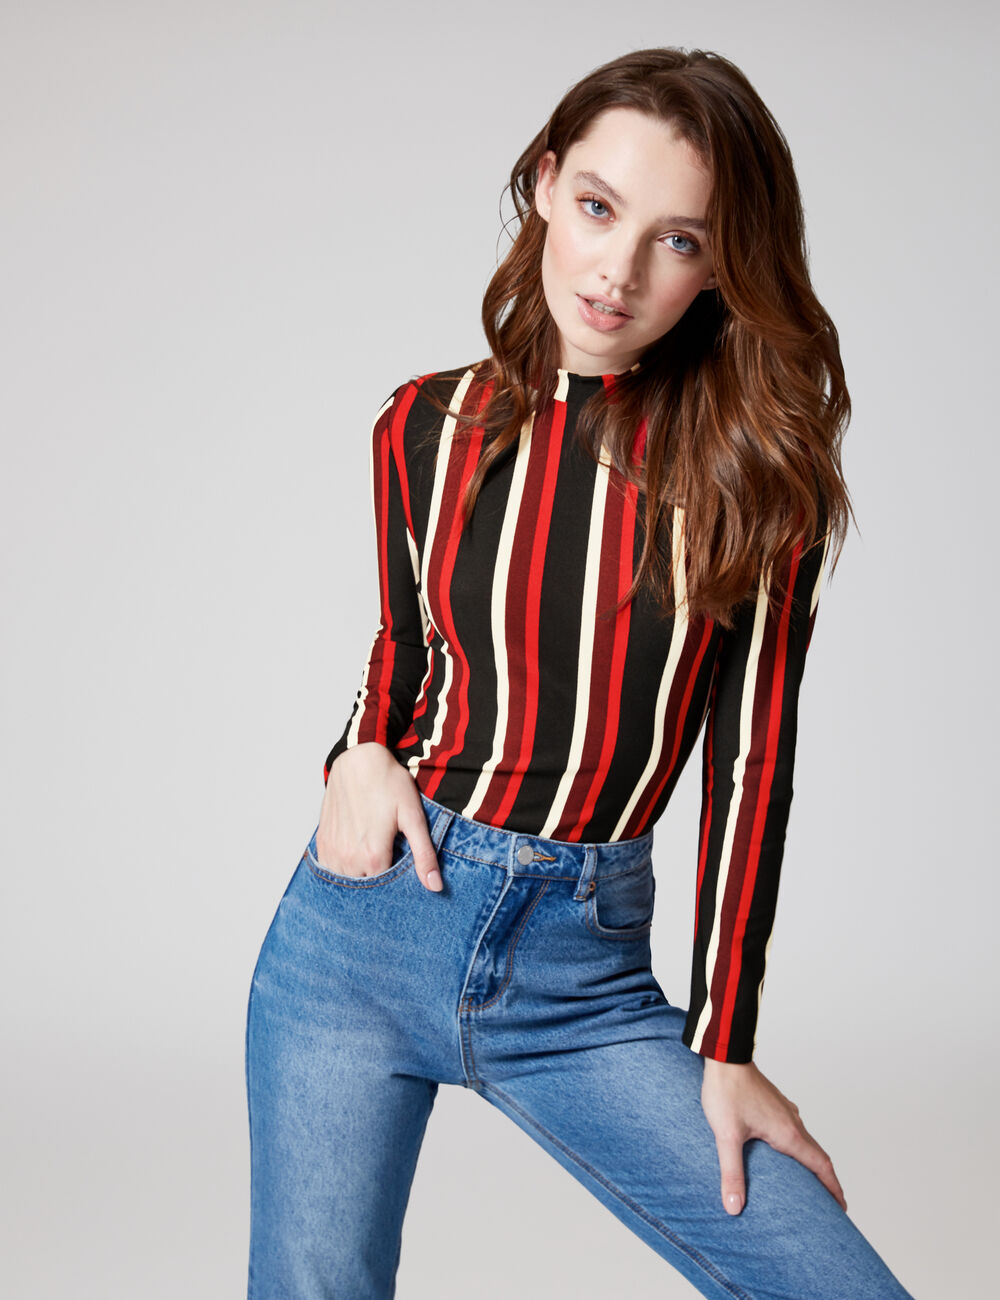 red and black striped tee shirt